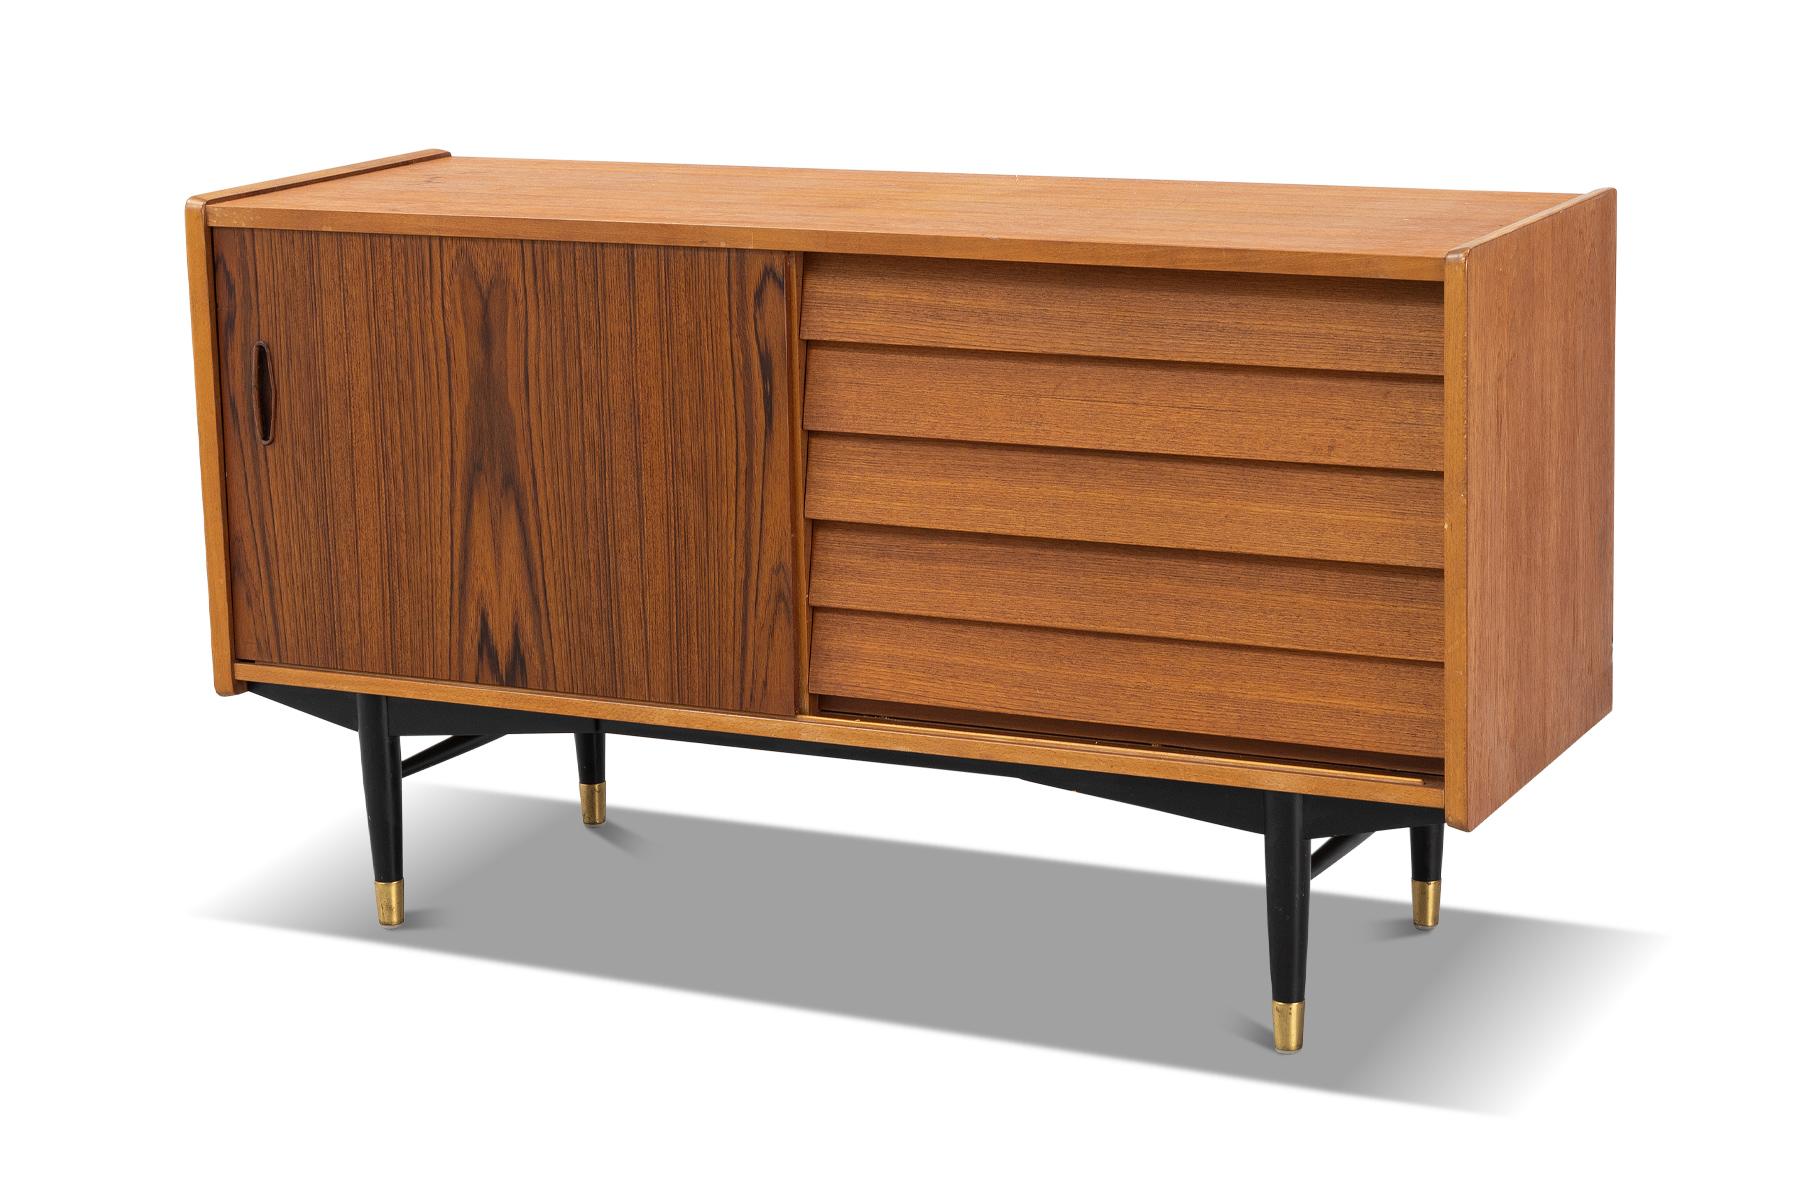 20th Century Swedish Modern Small Teak Credenza with Built in Bar For Sale